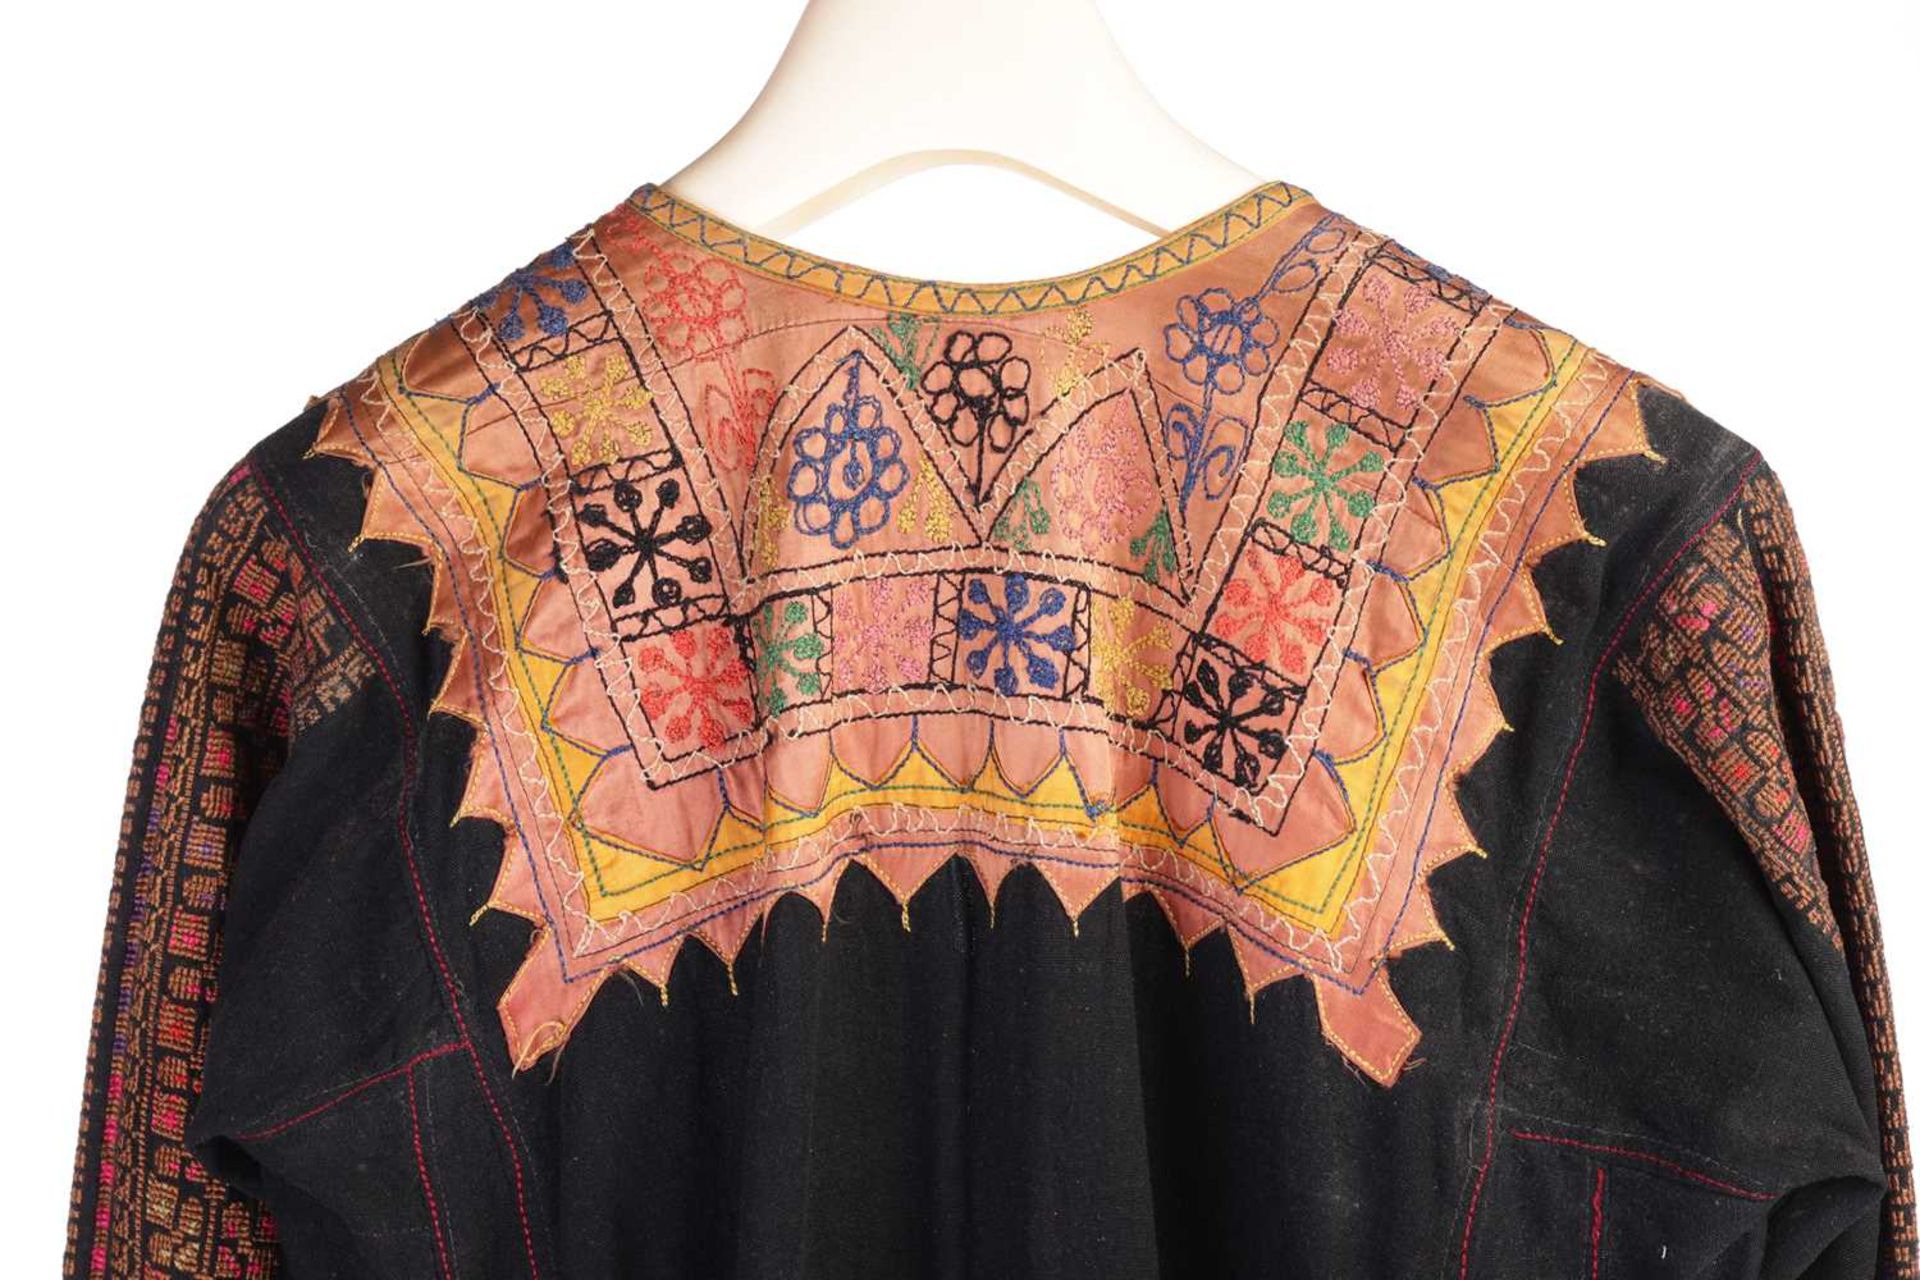 A Palestinian/Jordanian (?) lady's Thobe dress, with satin embellished shoulders and panels of geome - Image 4 of 10